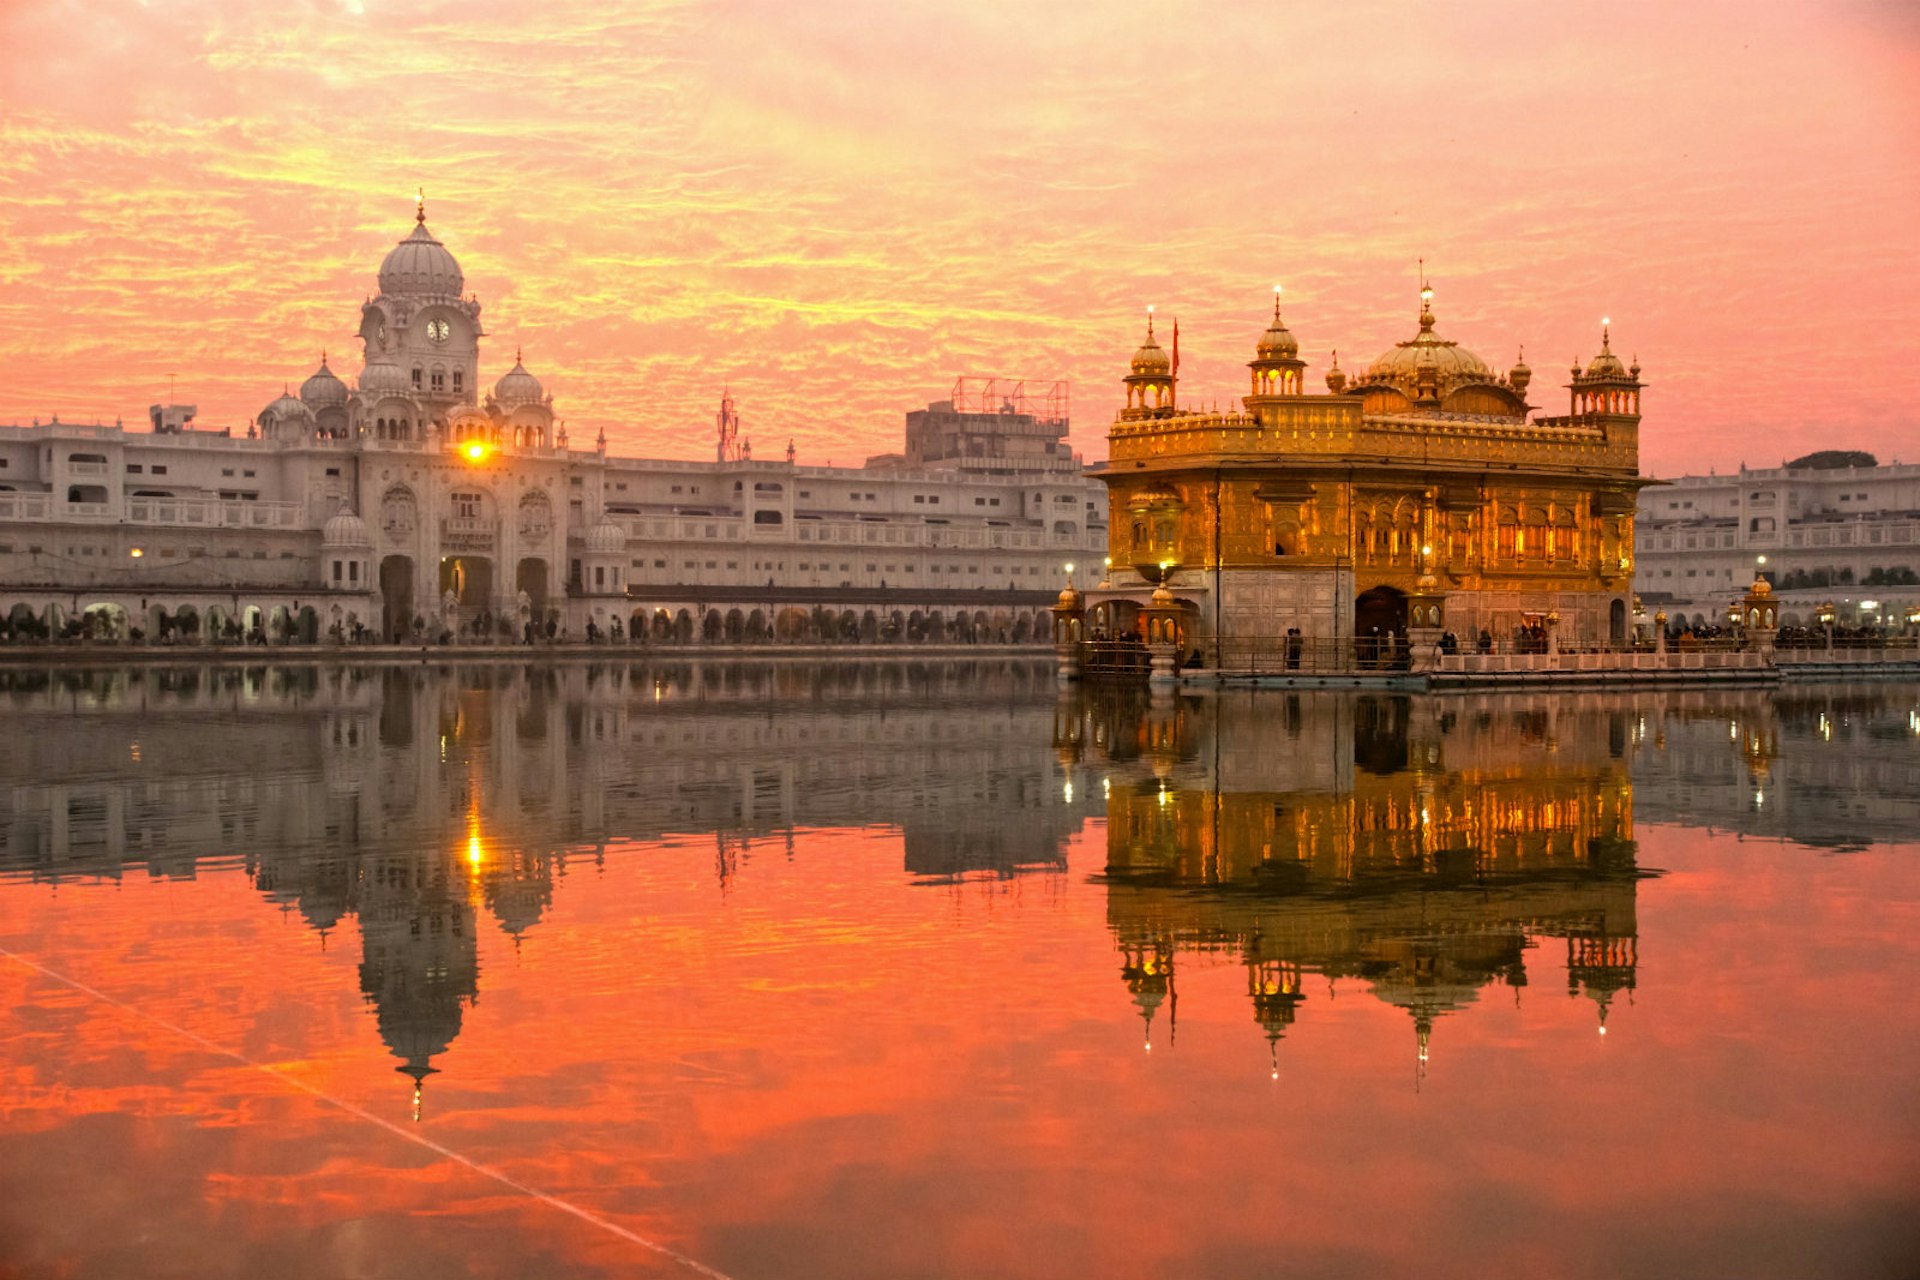 Golden Temple © Luciano Mortula / Getty Images